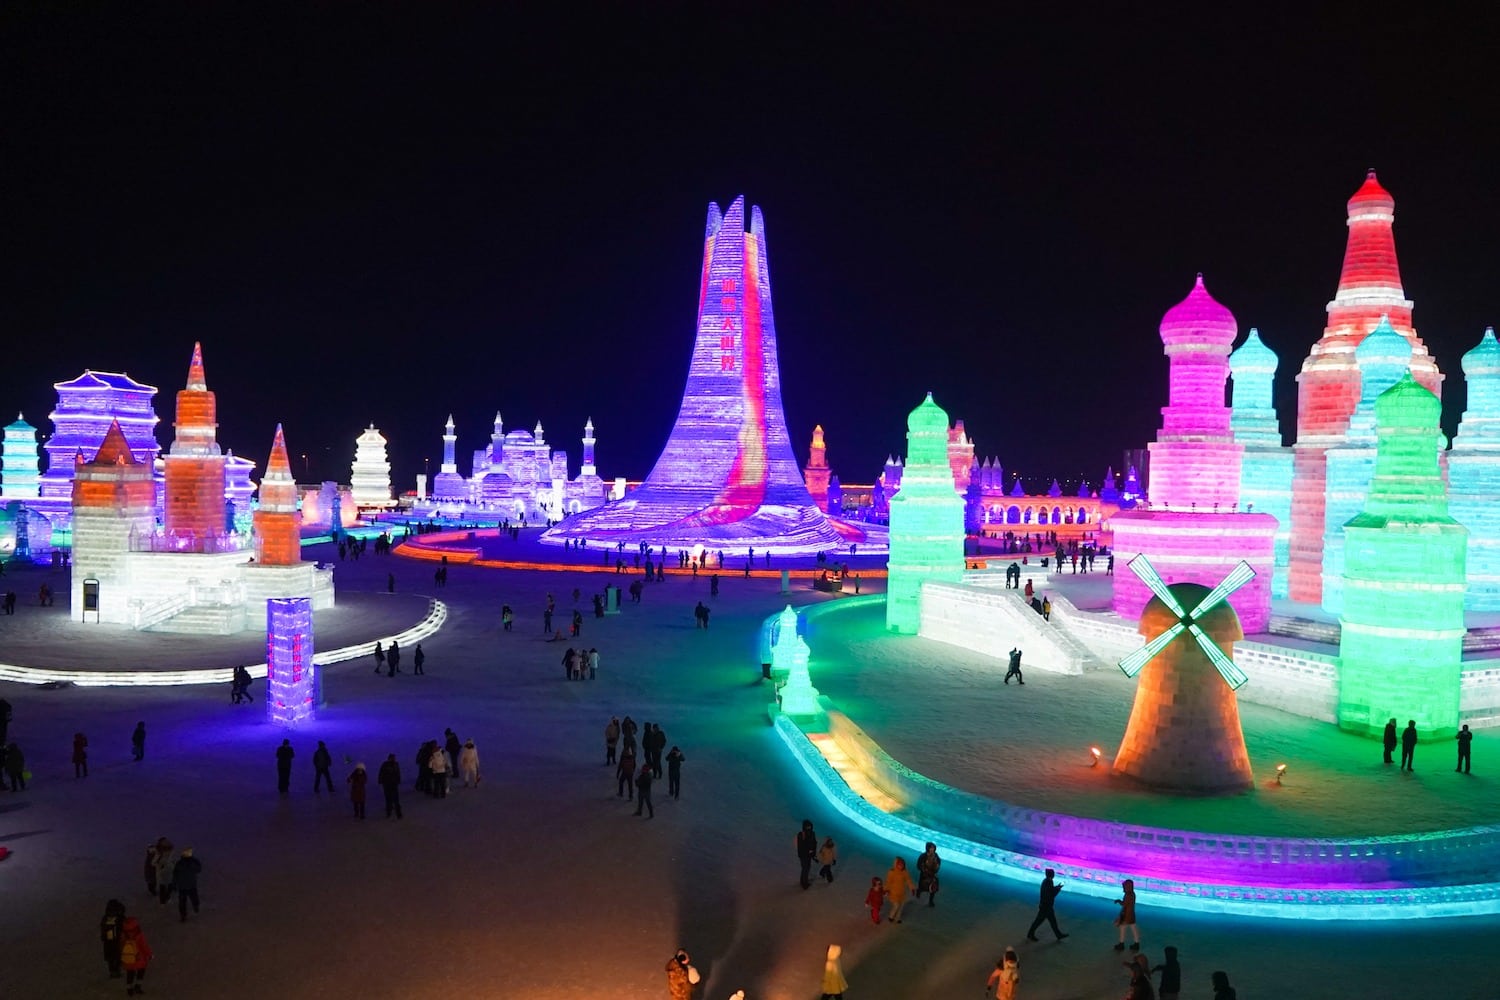 Why You Should Add The Harbin Ice and Snow Festival to Your Bucket List